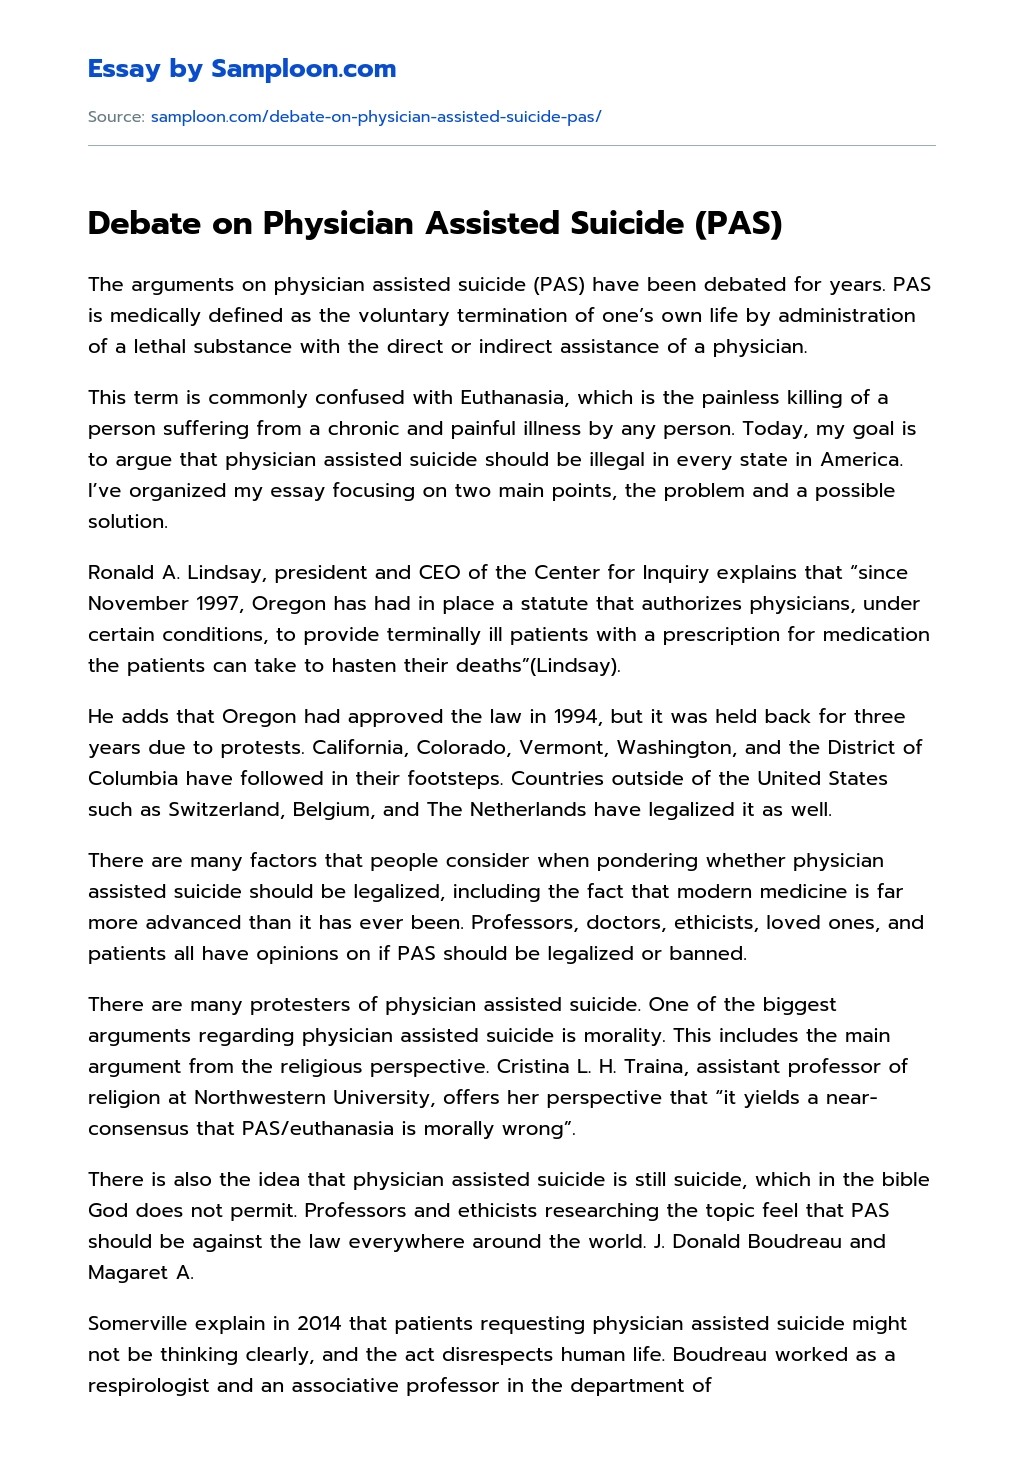 Debate on Physician Assisted Suicide (PAS) essay